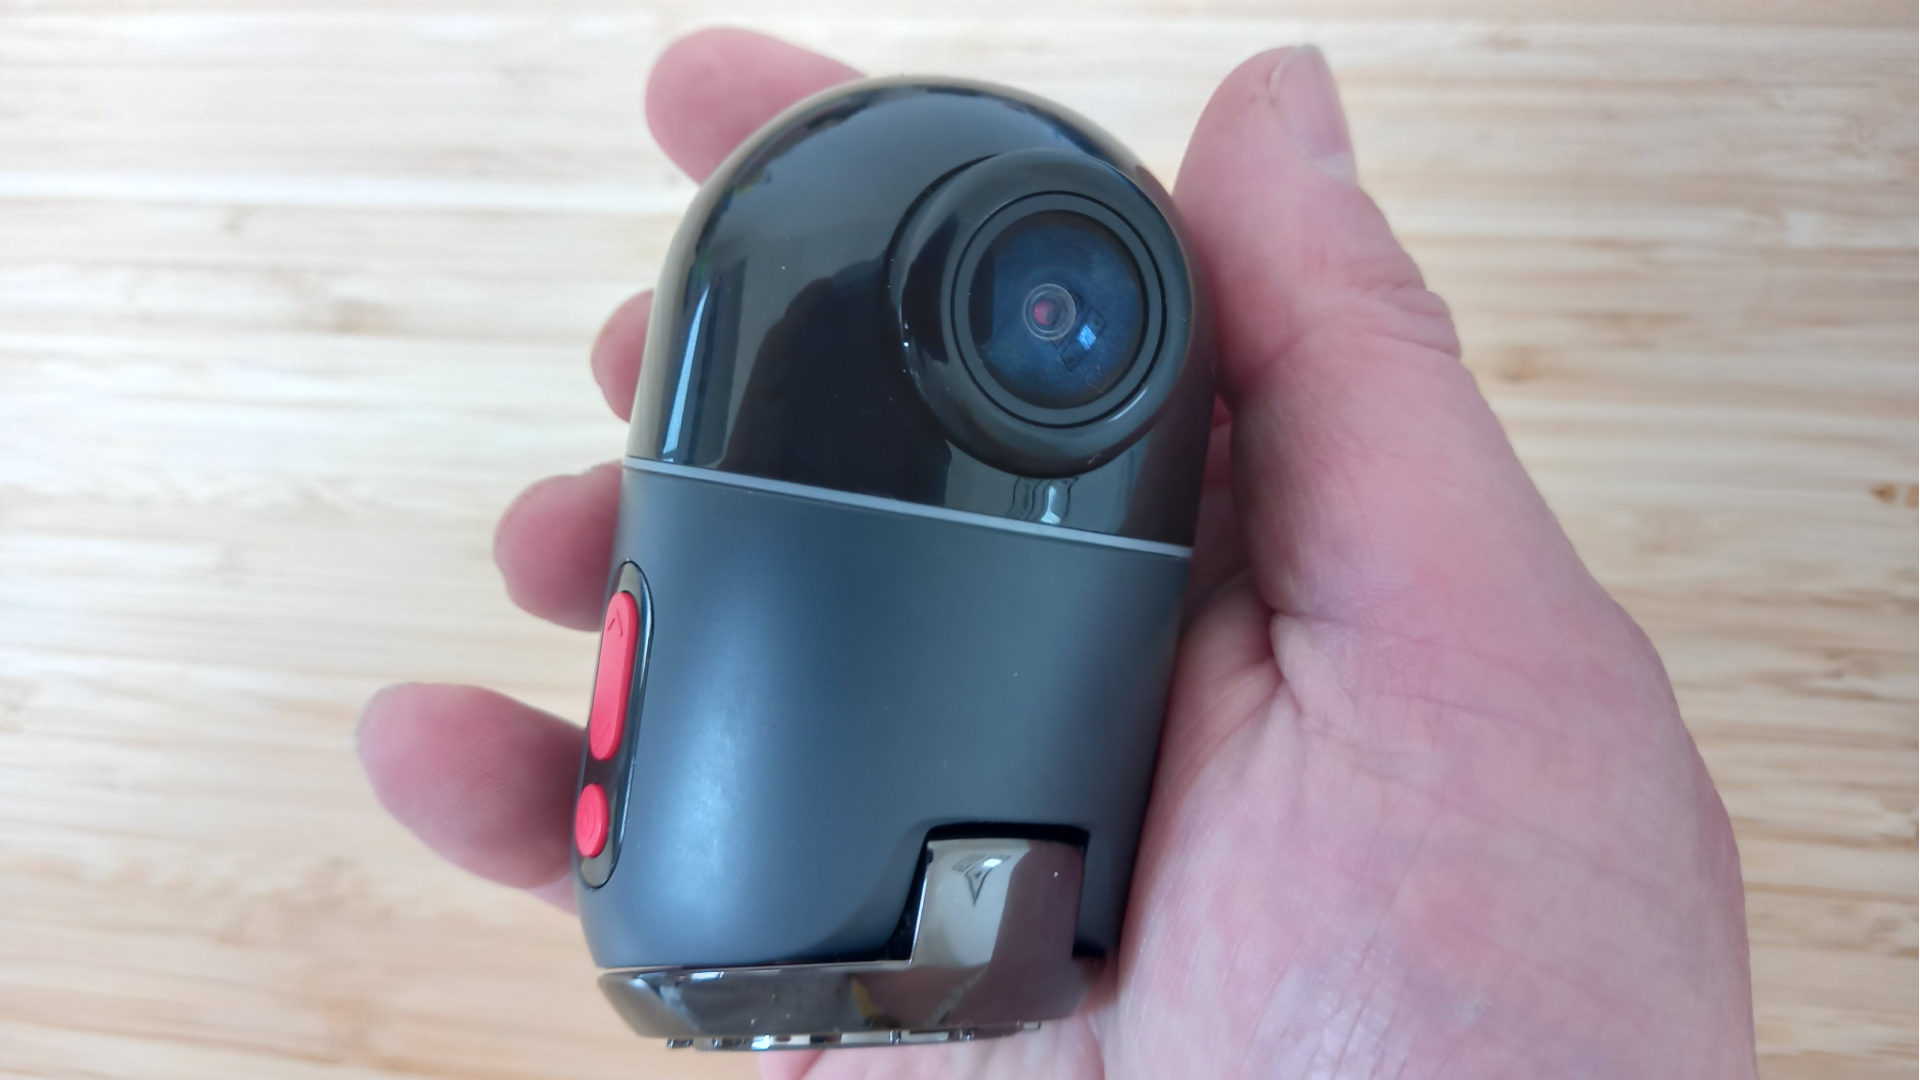 70mai Dash Cam Omni Review: A New 360-Degree Camera That Gets All the Shots